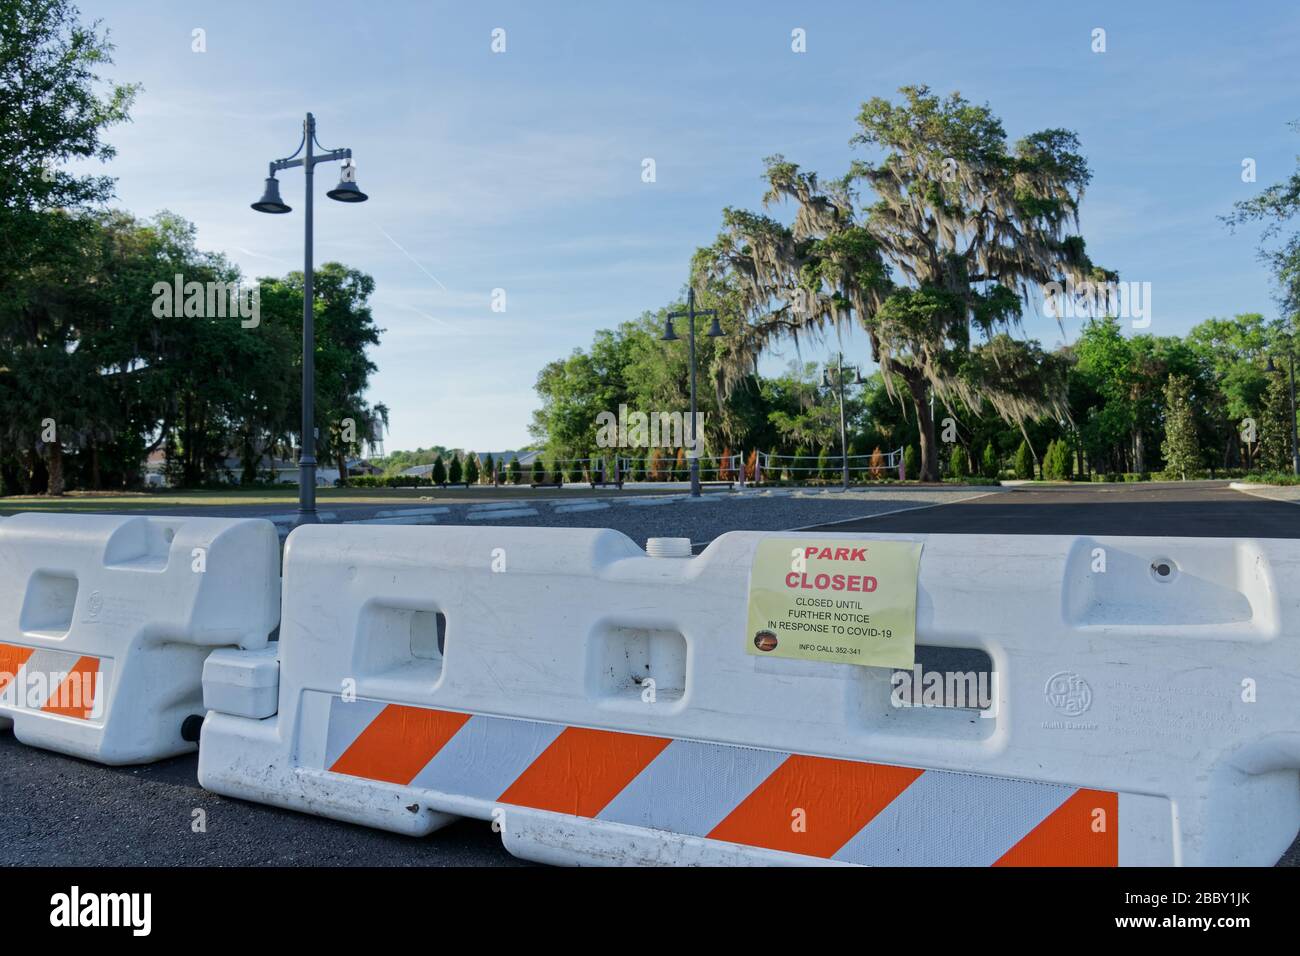 APRIL 1, 2020, INVERNESS, FL: Barricades with signs reading 'Park Closed' due to COVID-19 bar access to Inverness public parks 'until further notice'. Stock Photo